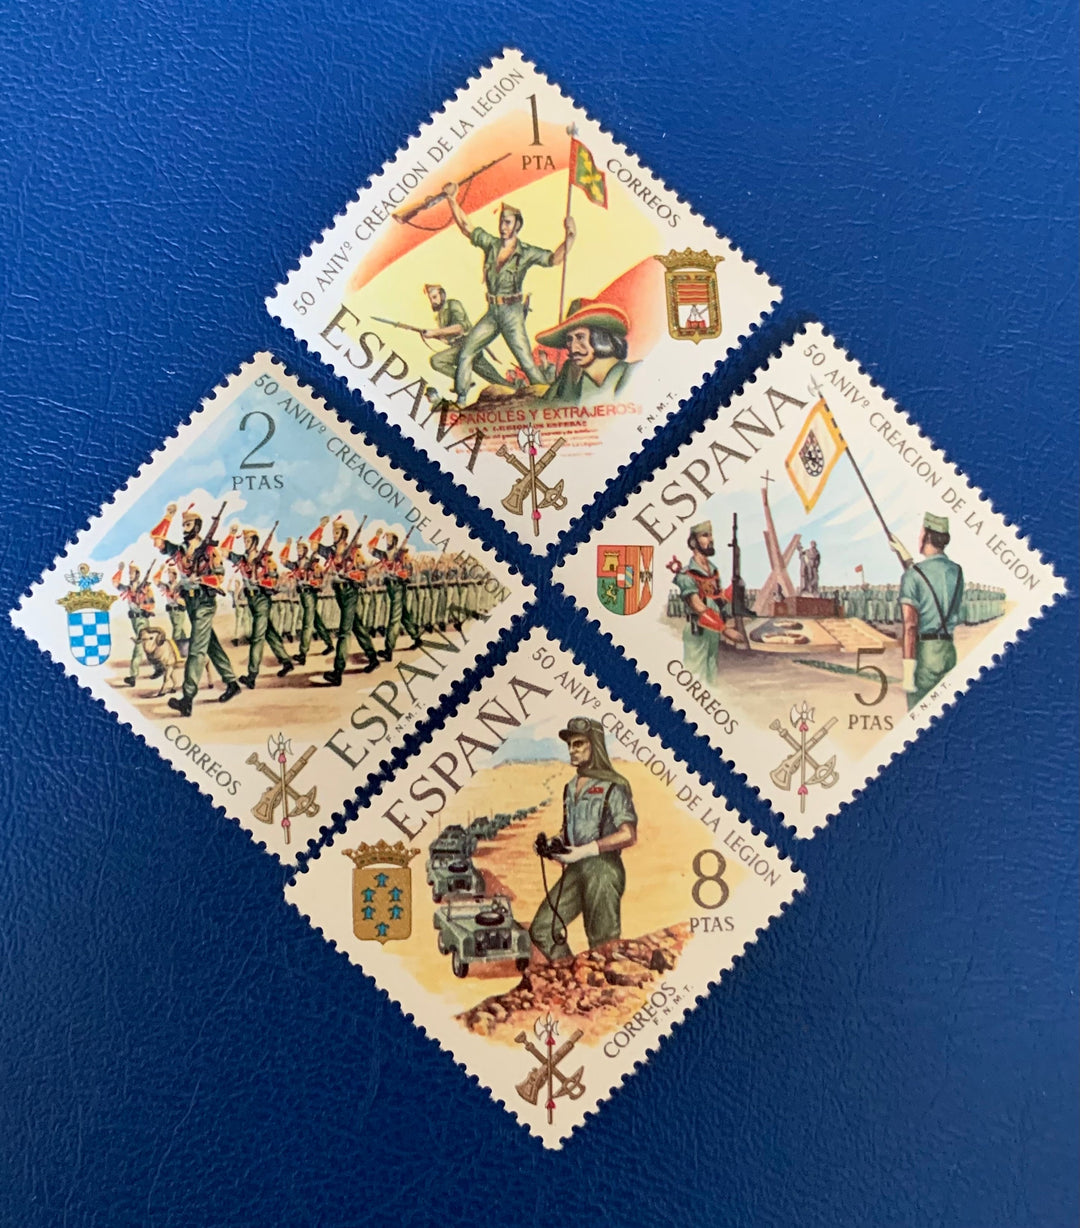 Spain - Original Vintage Postage Stamps- 1971 Spanish Legion 50th Anniversary - for the collector, artist or crafter